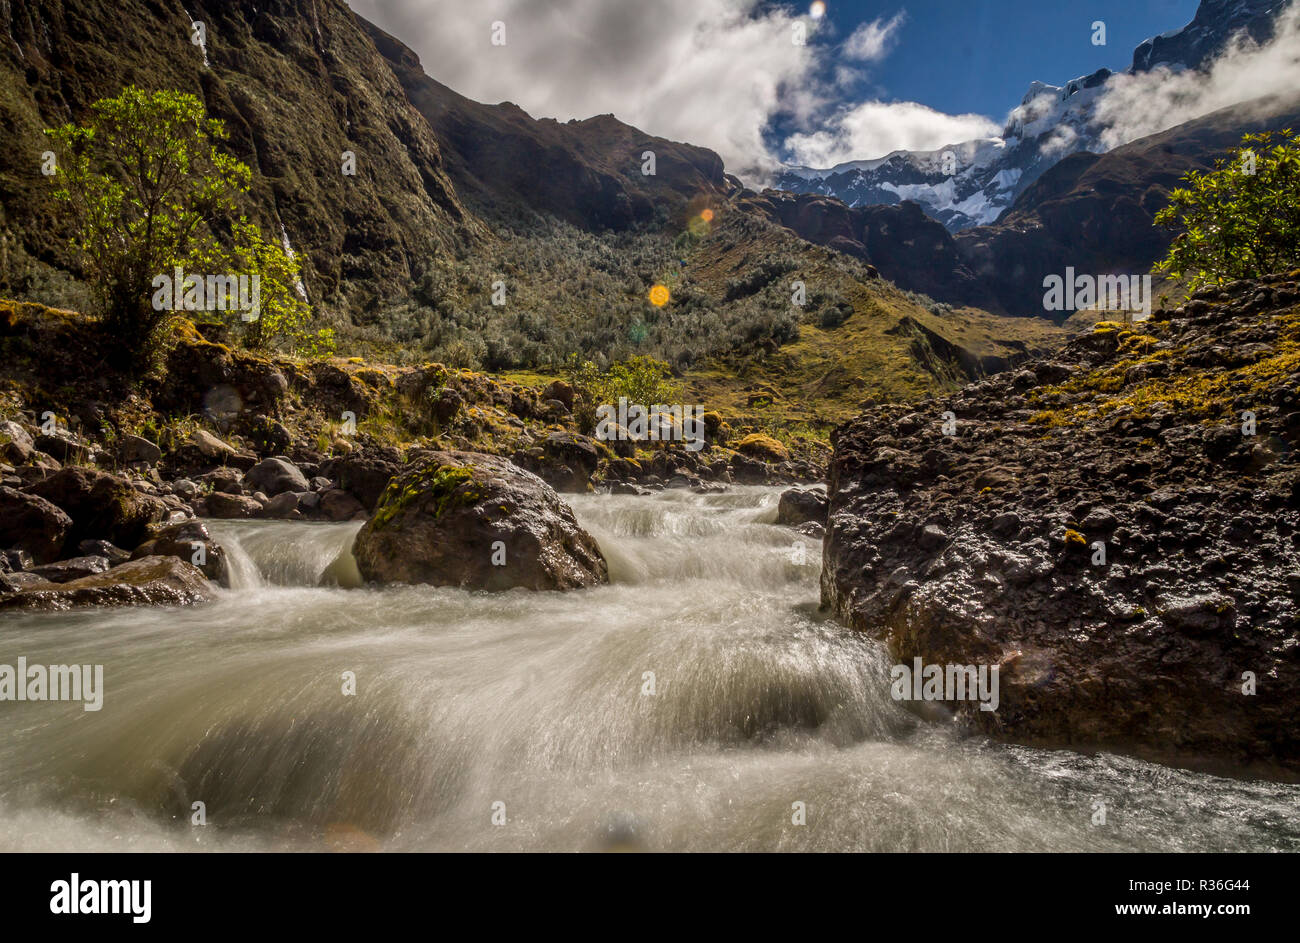 River in the Andes at El Altar Volcano in Ecuador. The Andean landscape near Banos in Ecuador is superb, from volcanic glaciers rivers flow through th Stock Photo